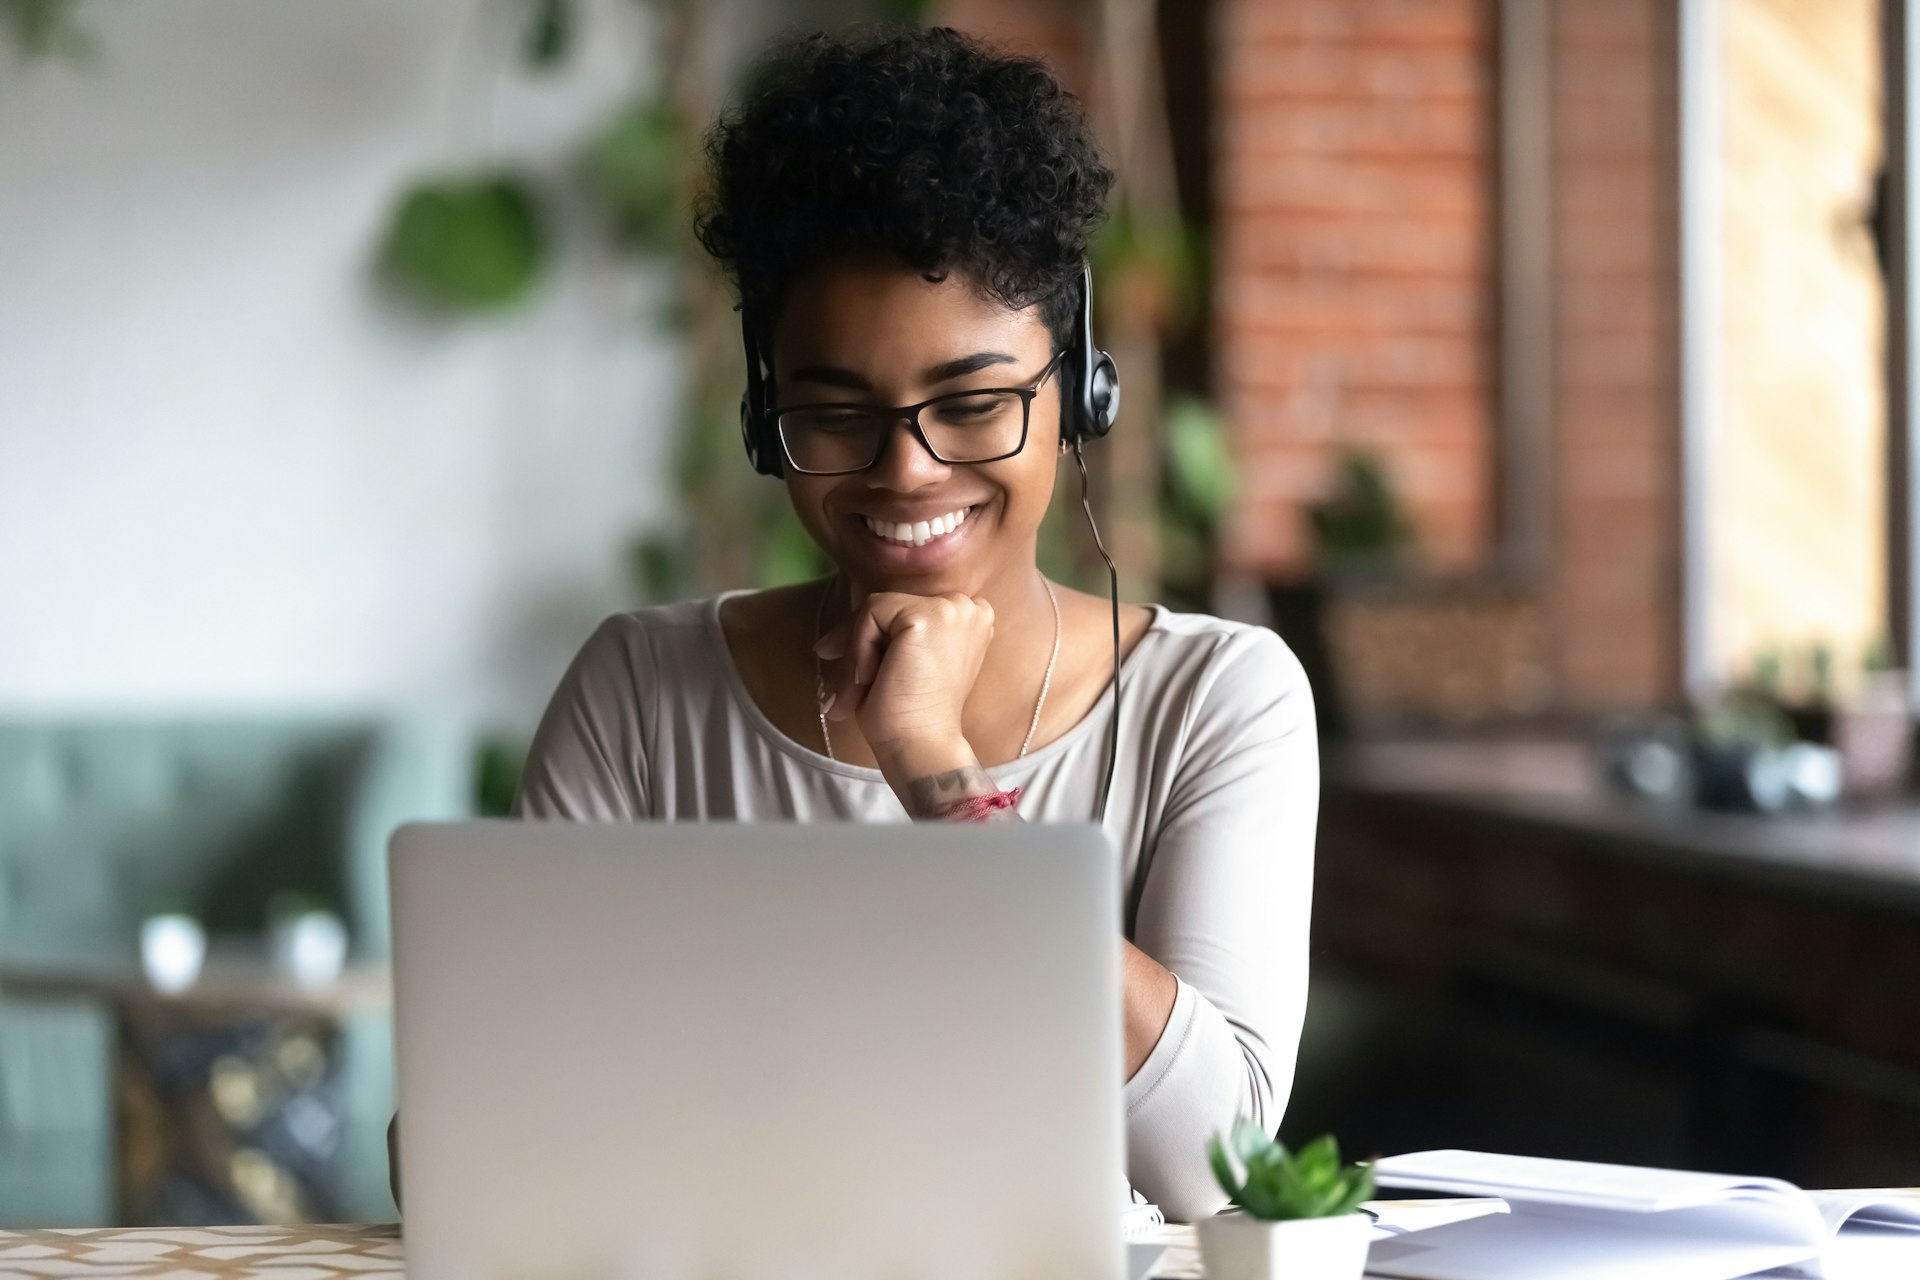 Black woman wearing headphones and smiling at her laptop